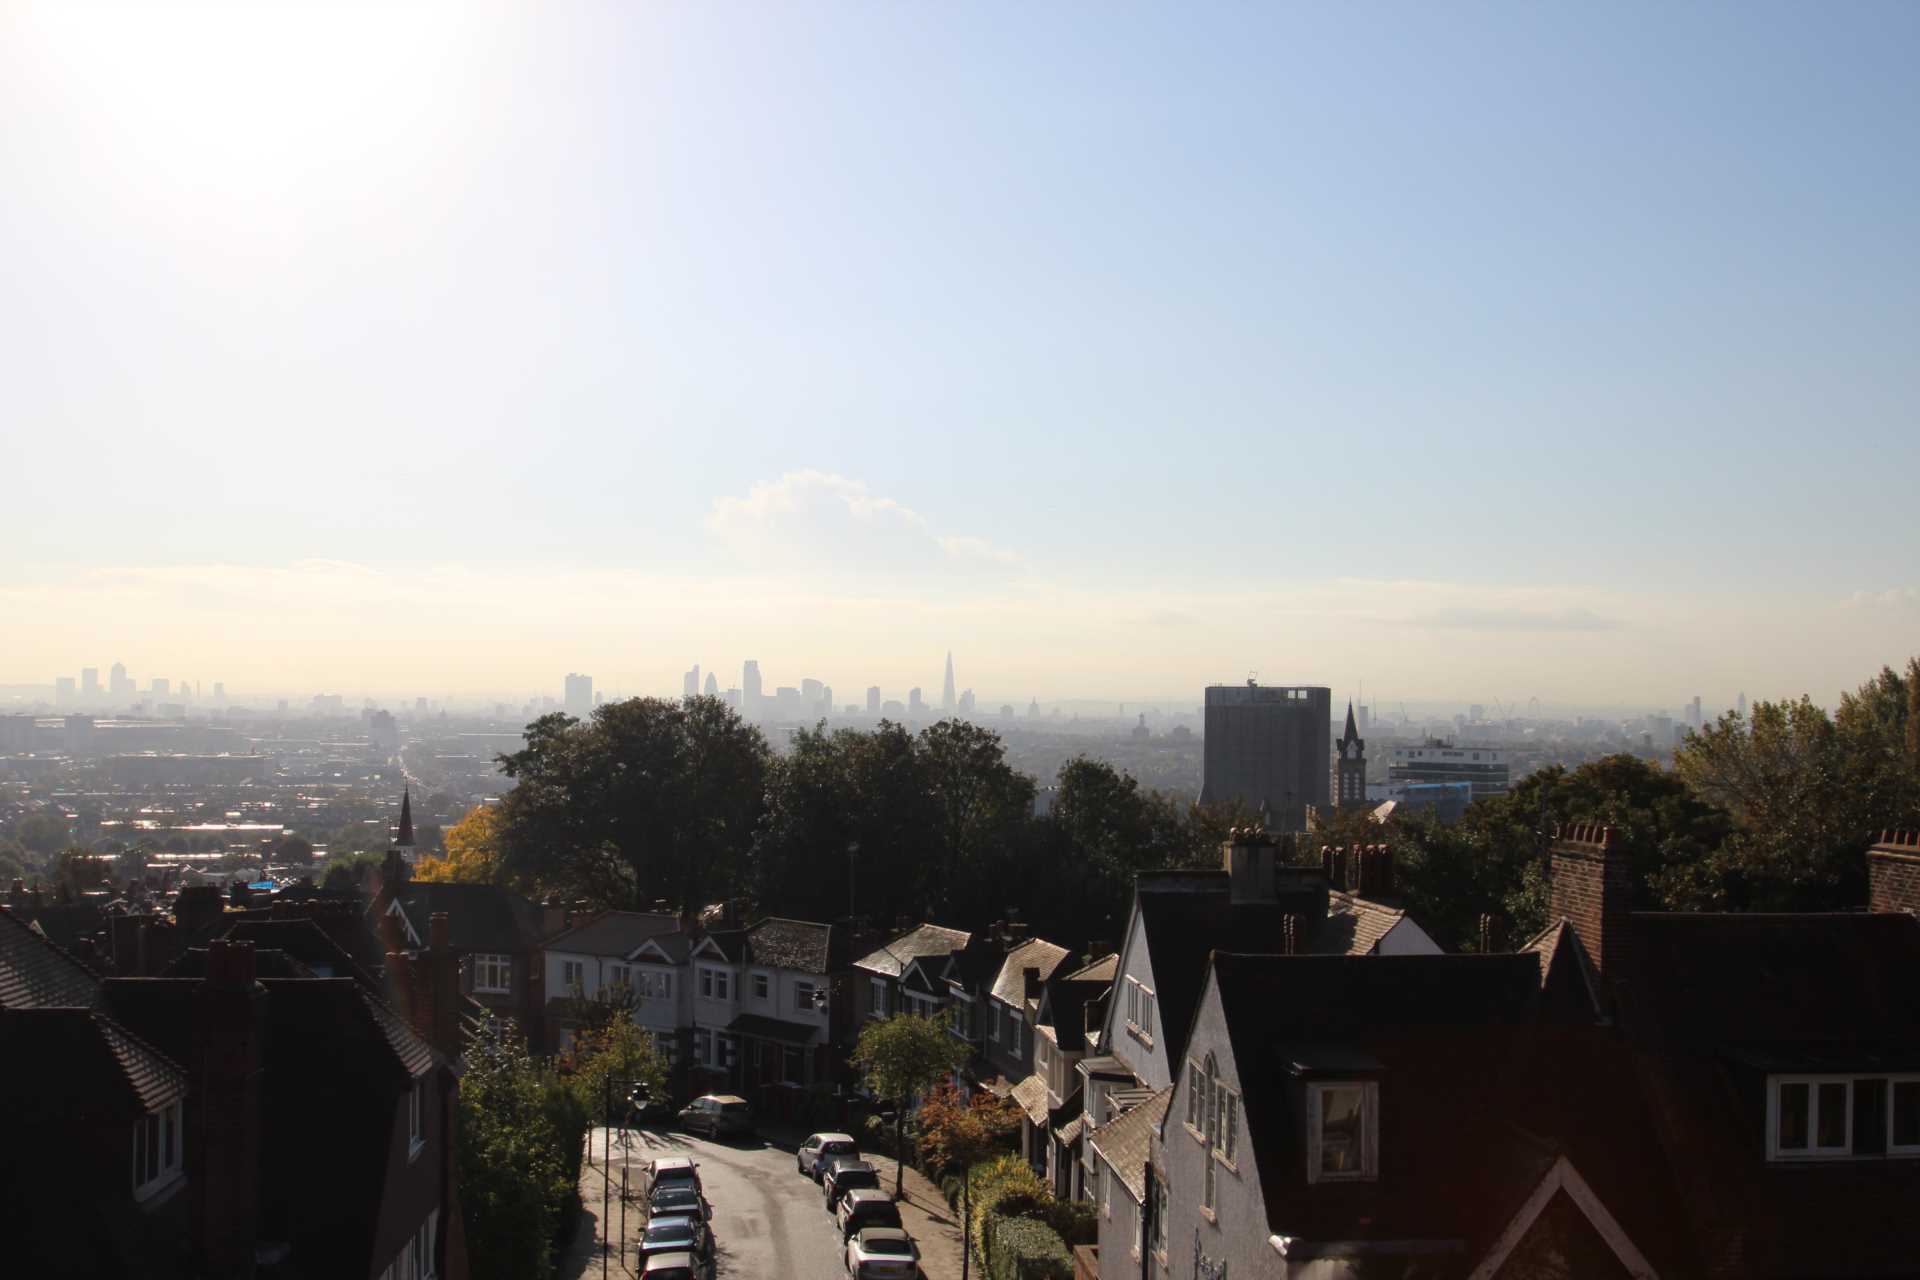 10 Reasons To Move To Highgate - Day 1 - City Views